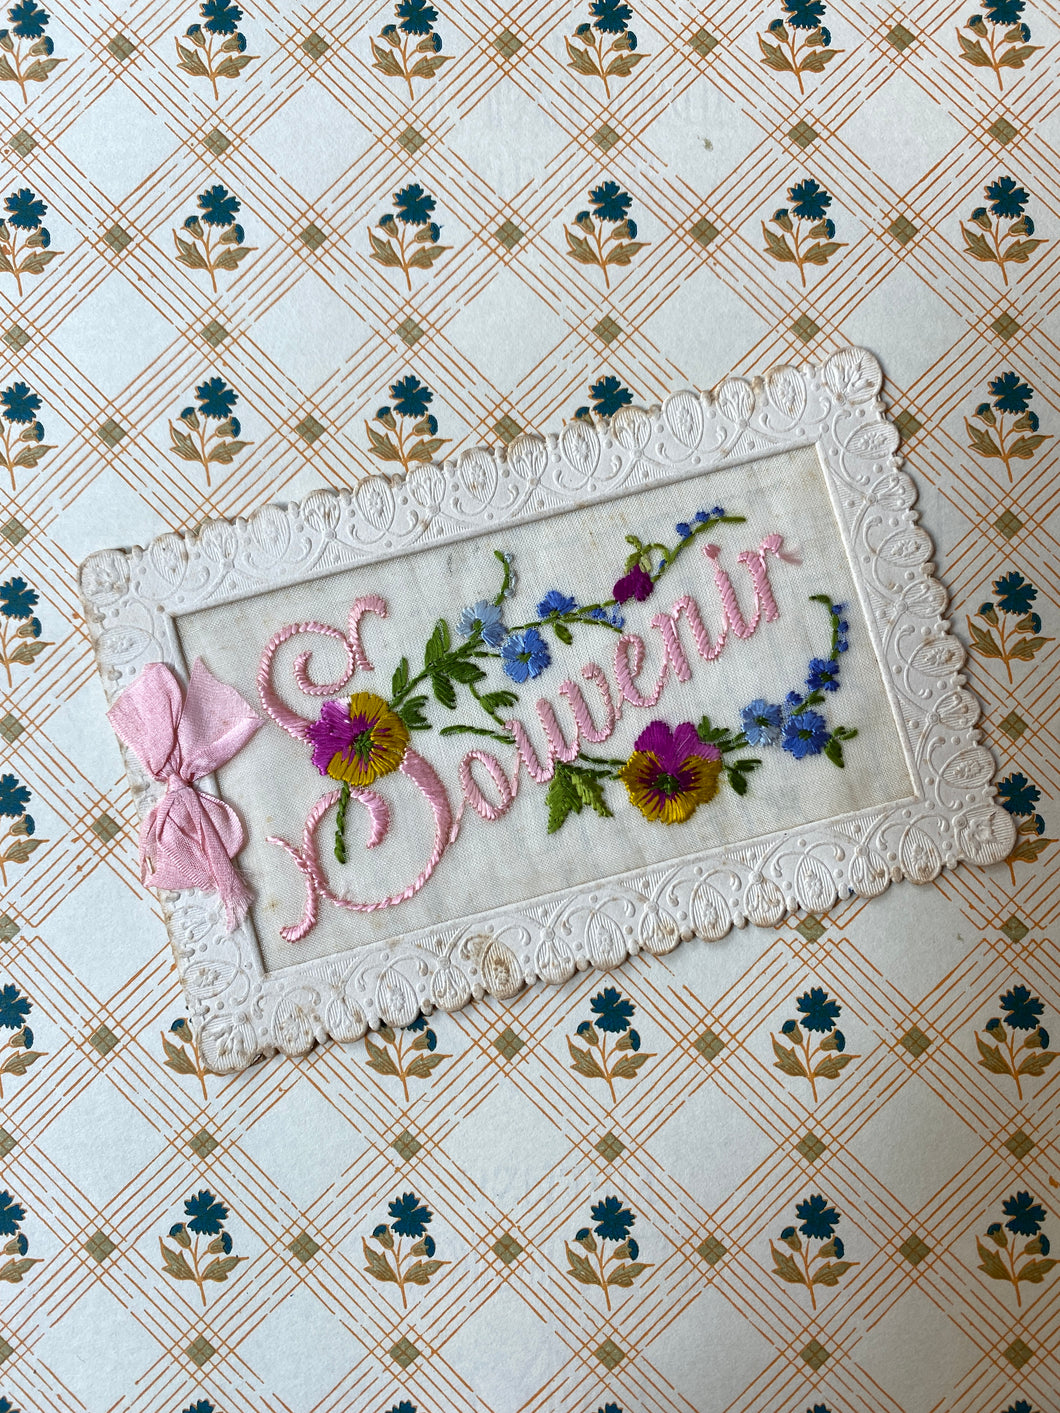 Antique embroidered cards / アンティーク刺繡カード / Cartes brodée antiques